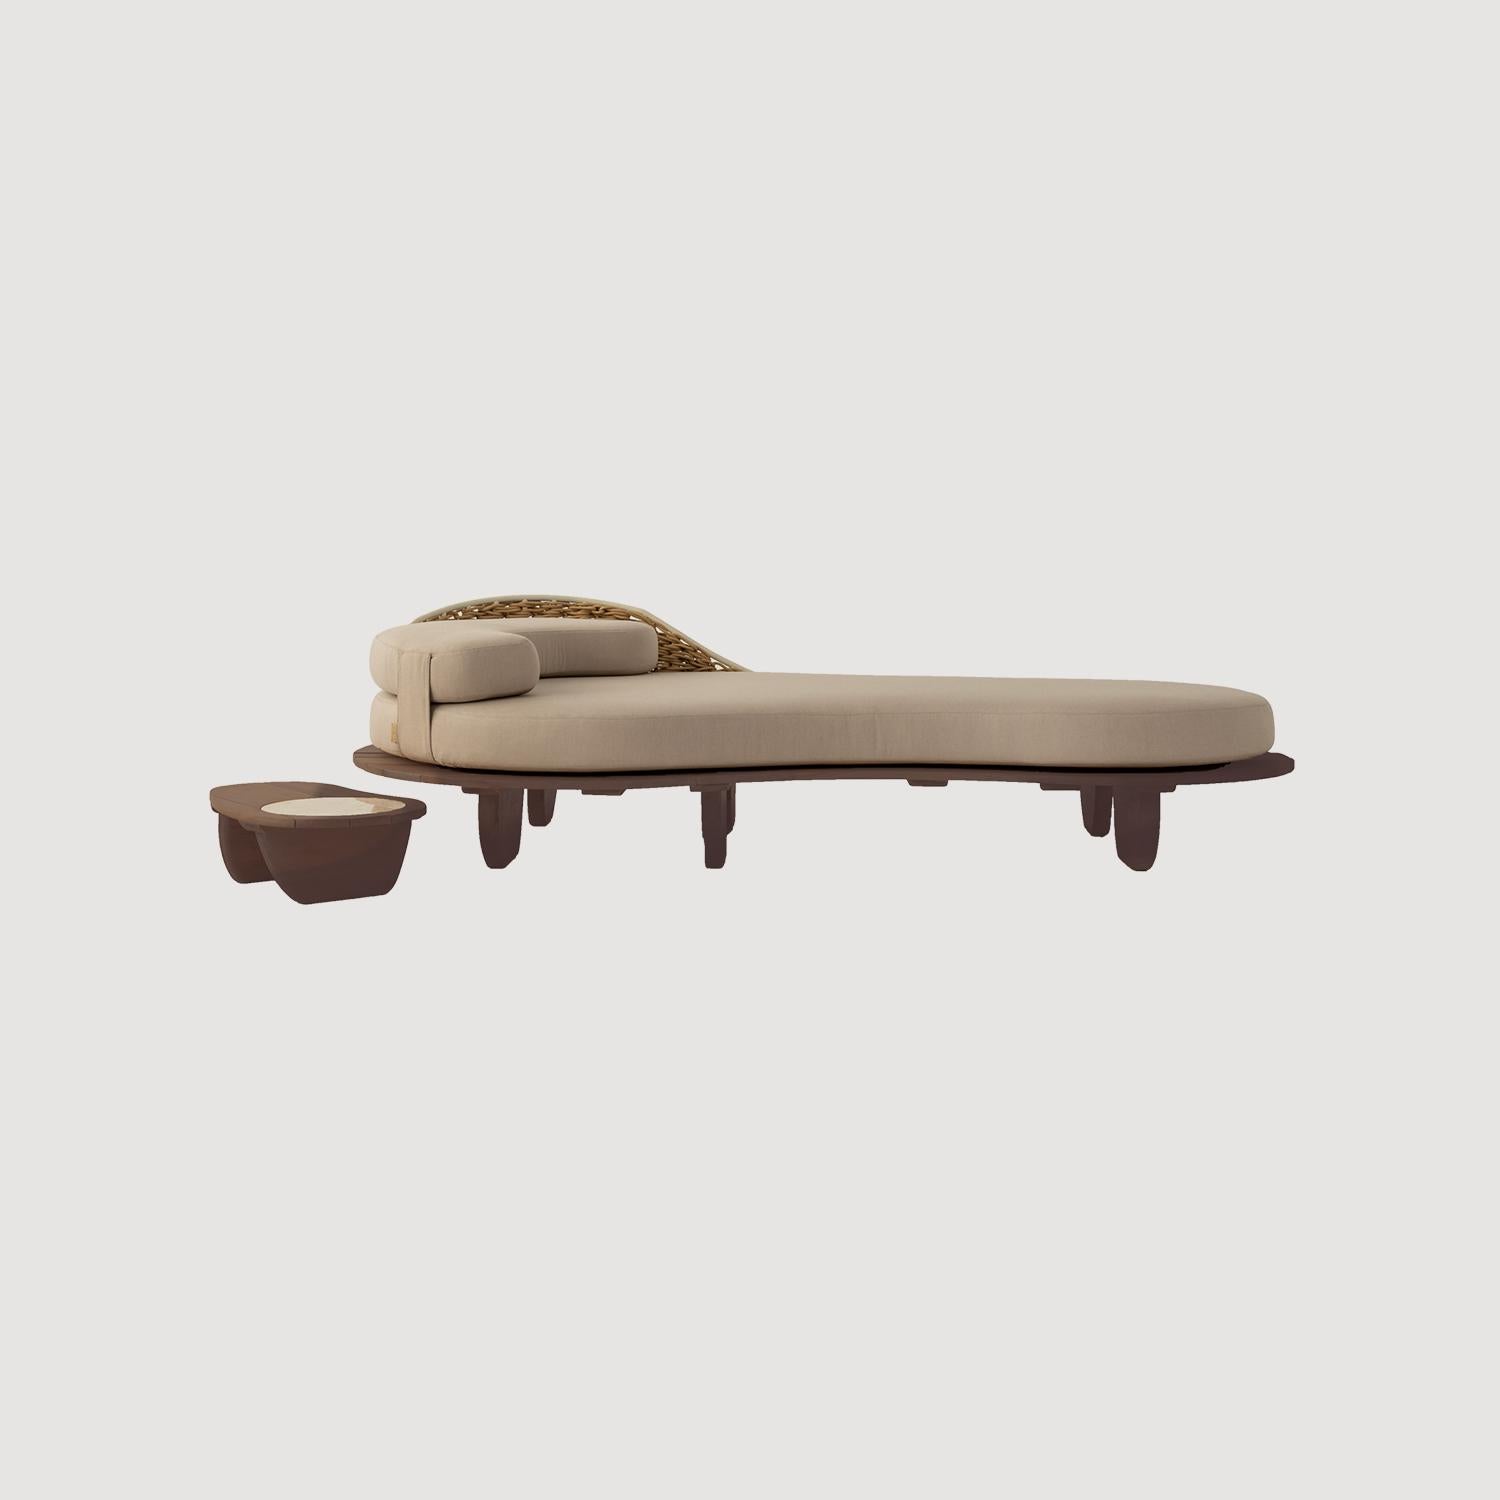 The Sayari Indoor / Outdoor Daybed Chaise Collection by Studio Lloyd For Sale 5